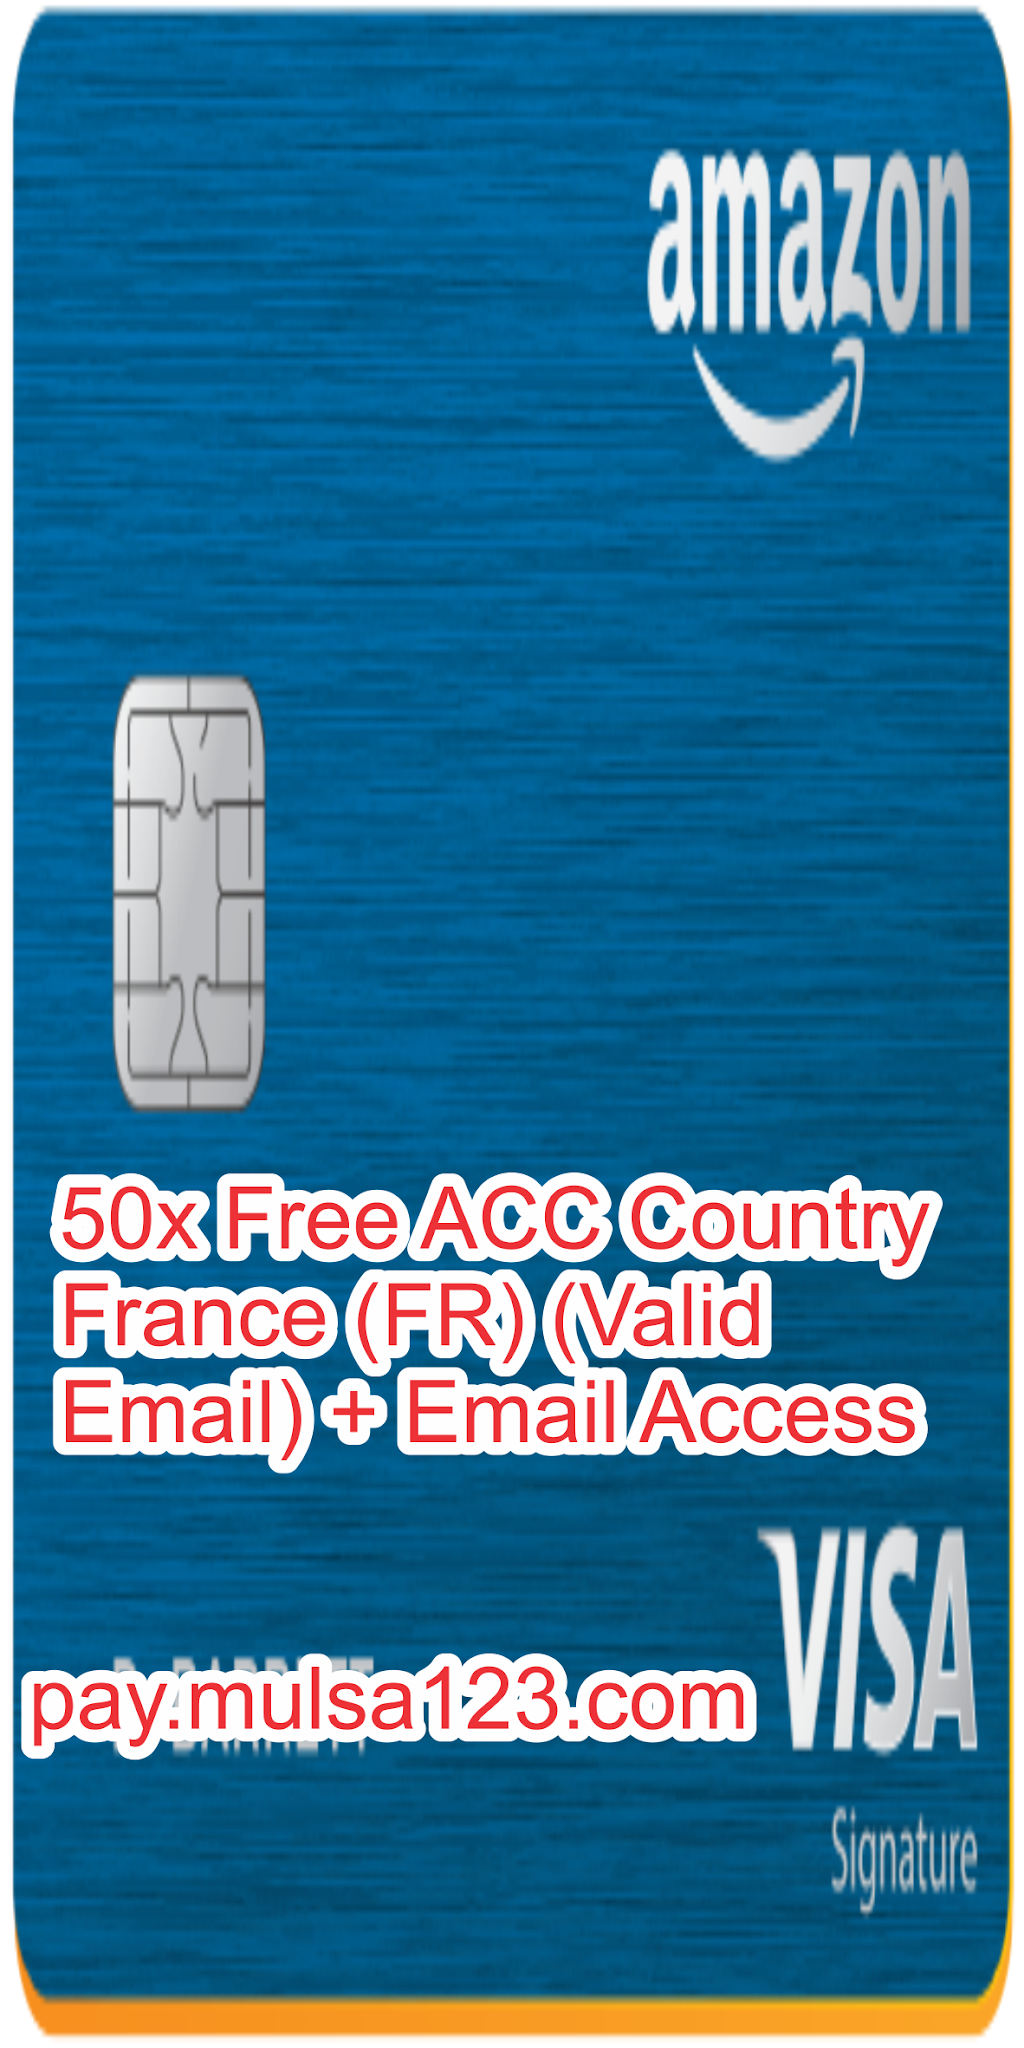 50x Free ACC Country France (FR) (Valid Email) + Email Access